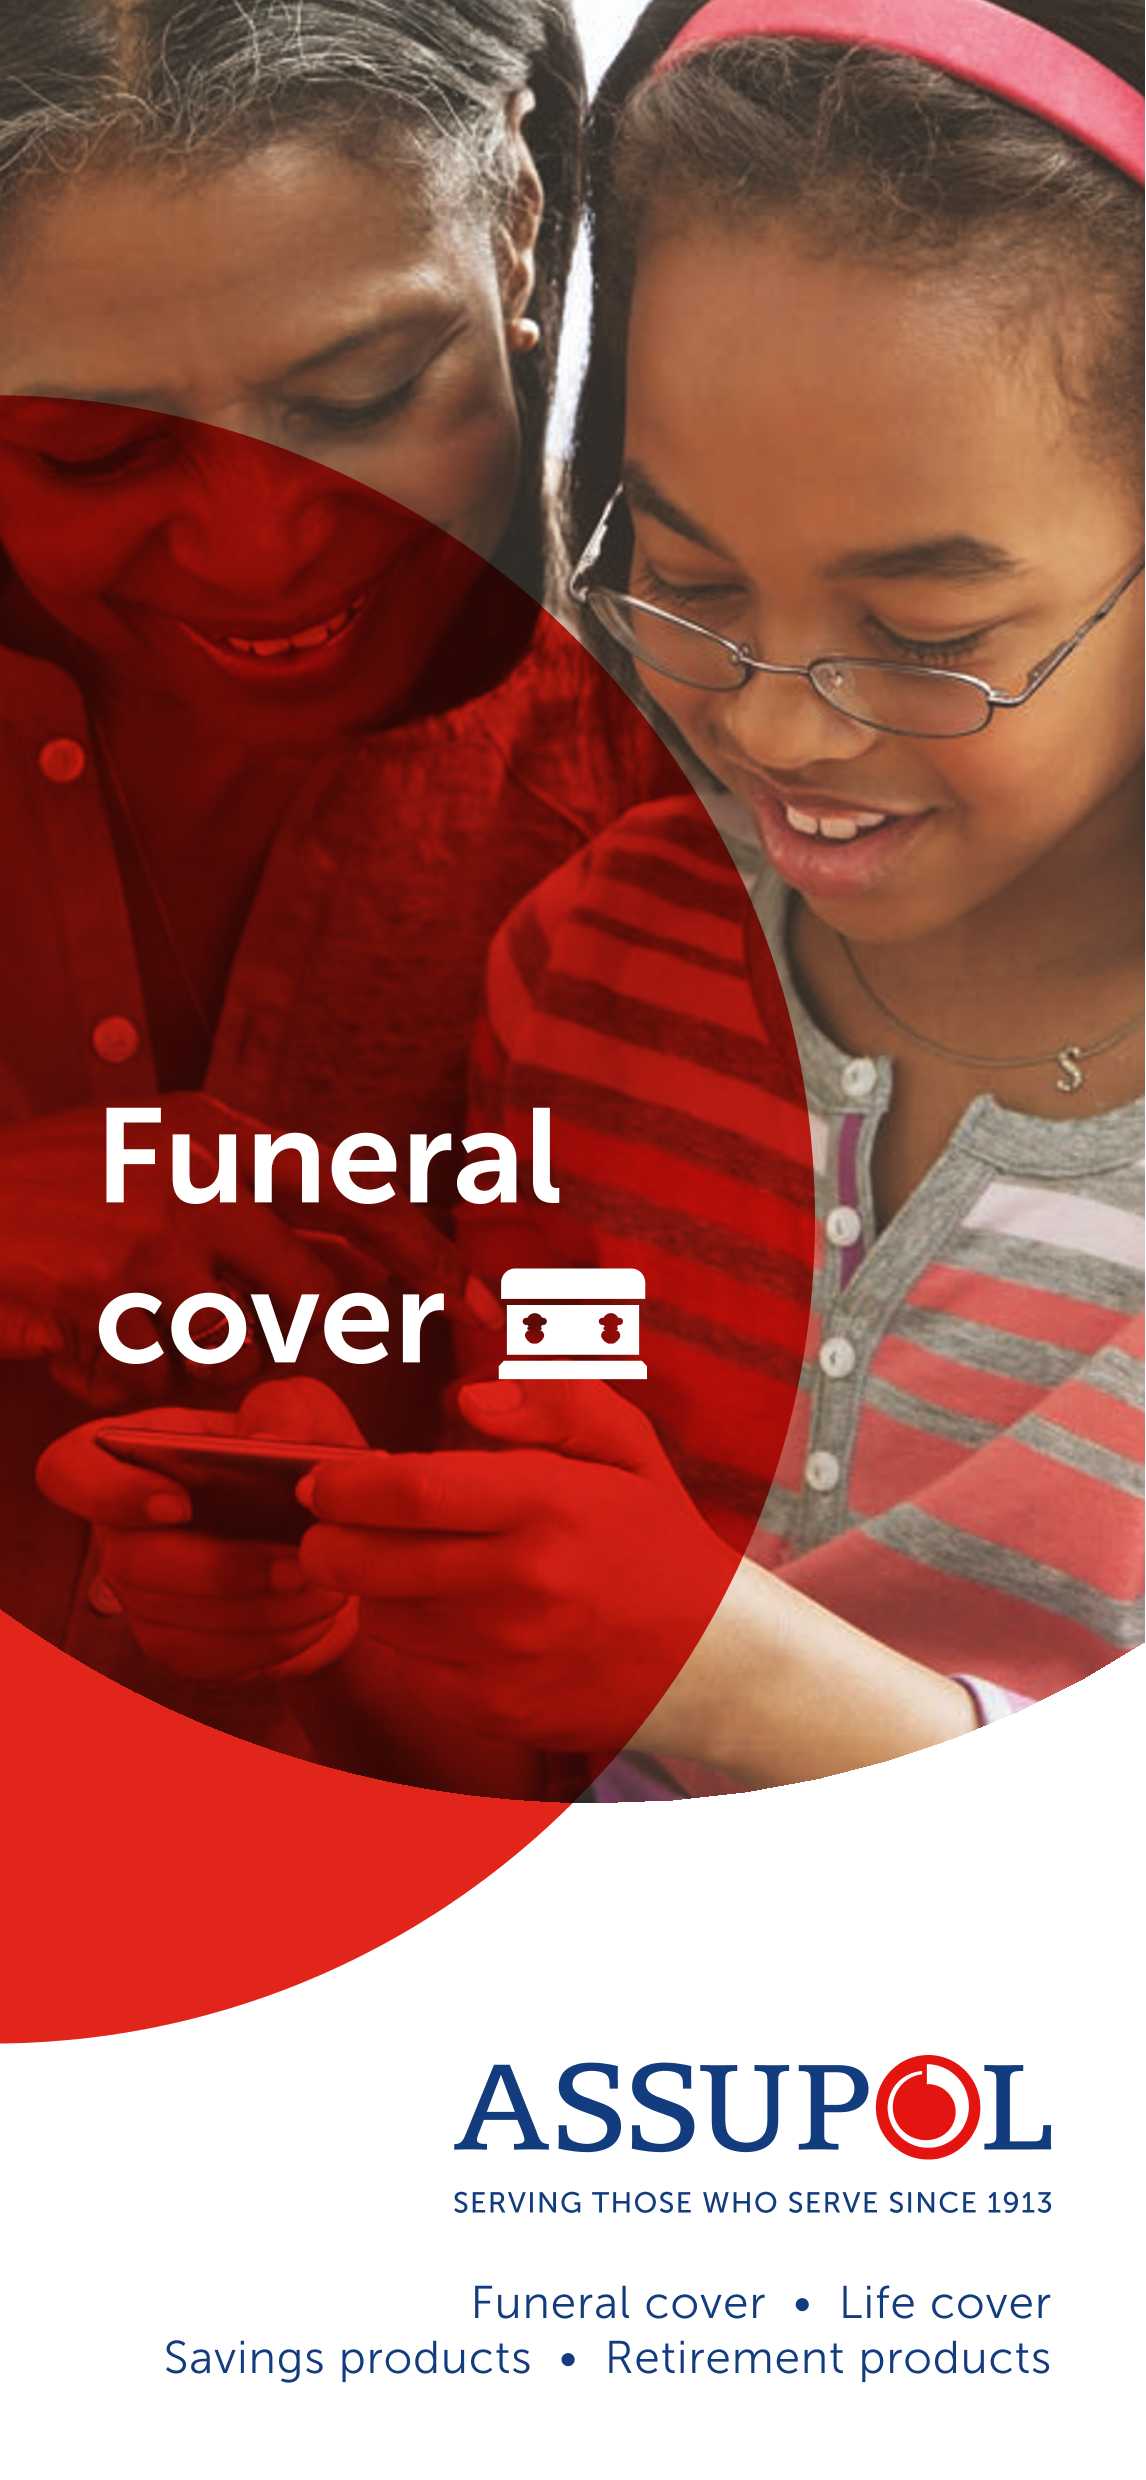 Assupol-Funeral-cover_web (1)_Page_1